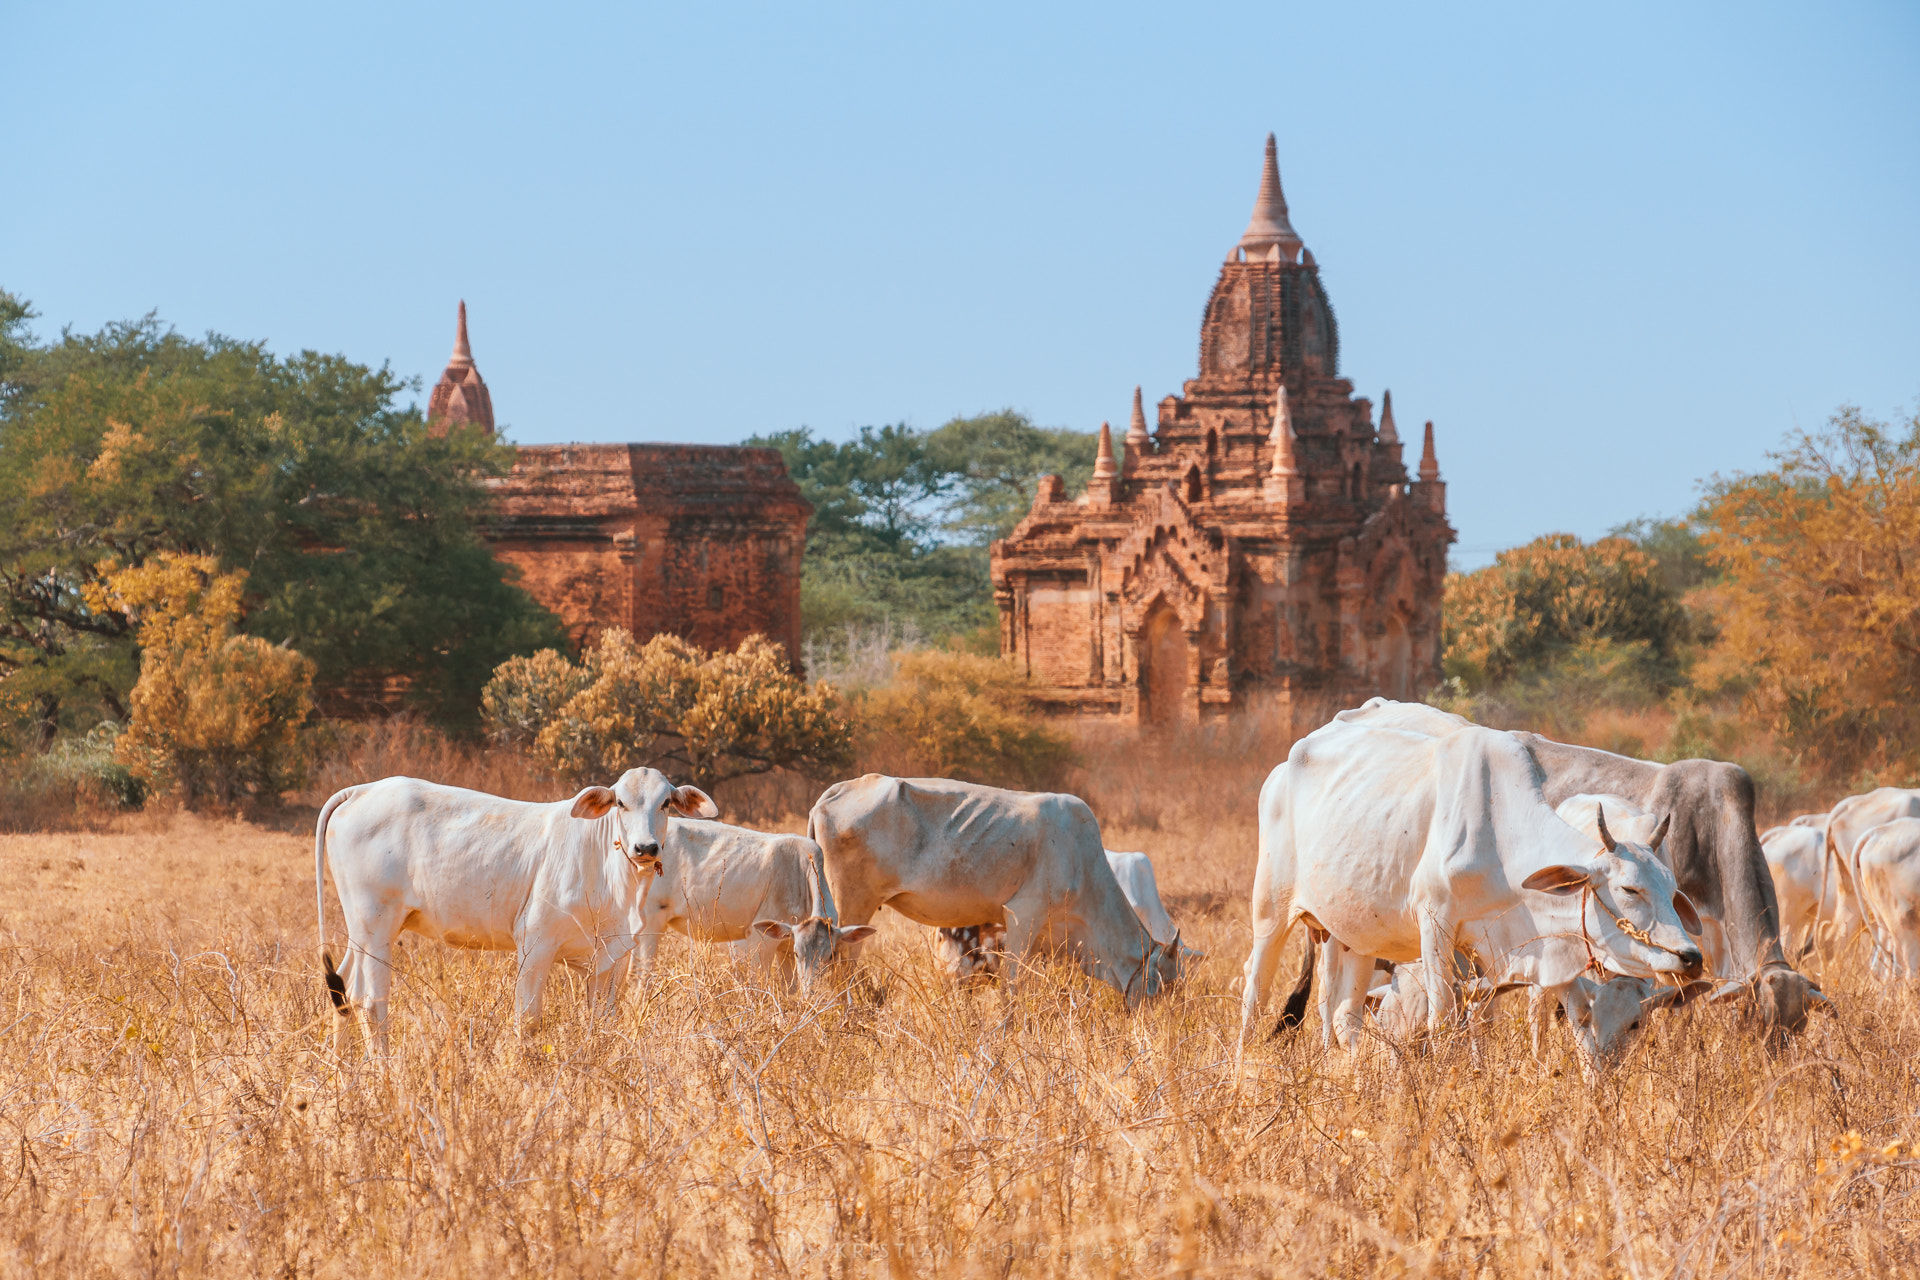 Sony a6000 sample photo. Old bagan cattle photography